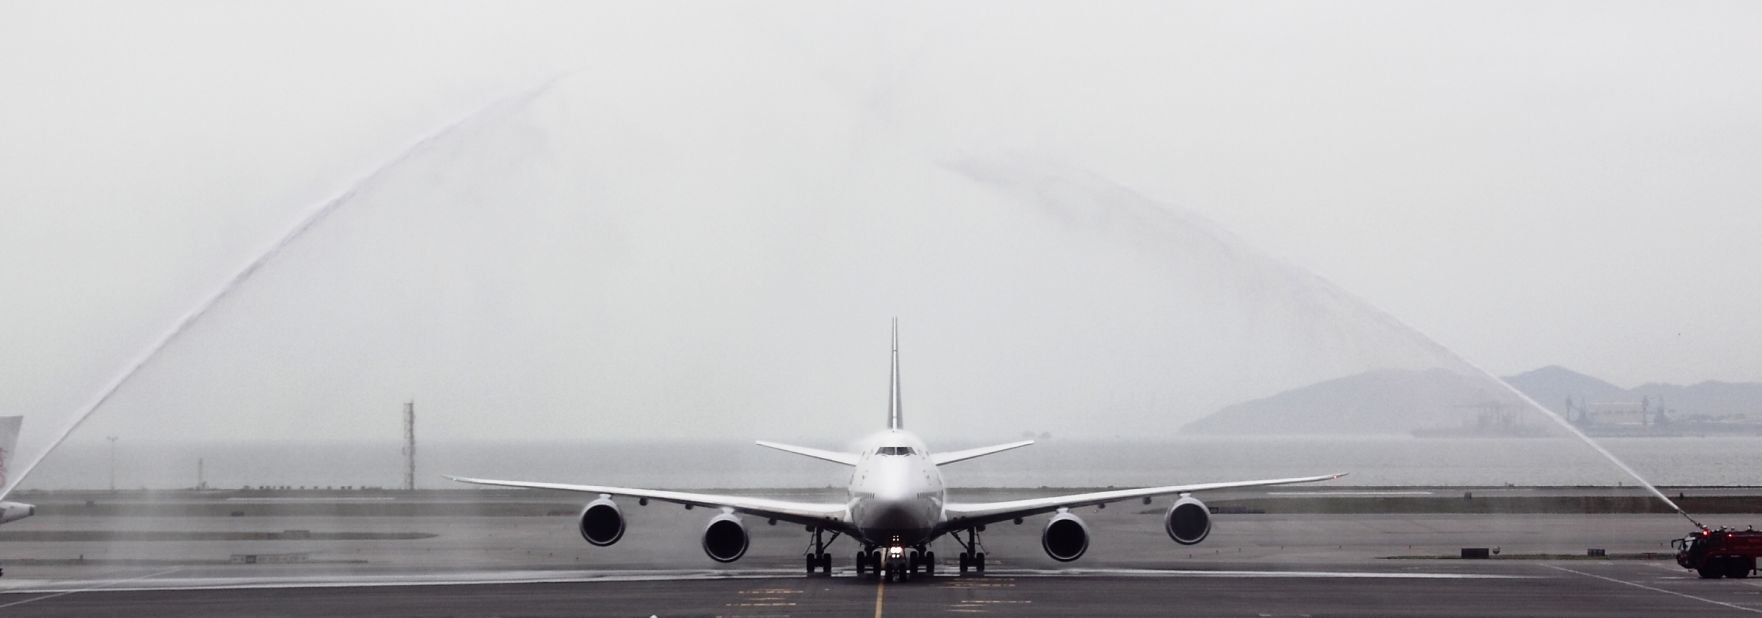 Water cannons greet the arrival of the first 747-8 Intercontinental to Hong Kong in April. The latest version of the fabled jumbo jet, the 747-8 Intercontinental rolled out last year and is currently being built at a rate of two per month. Each 747-8 is made up of about 6 million parts and has a list price of $351.4 million.